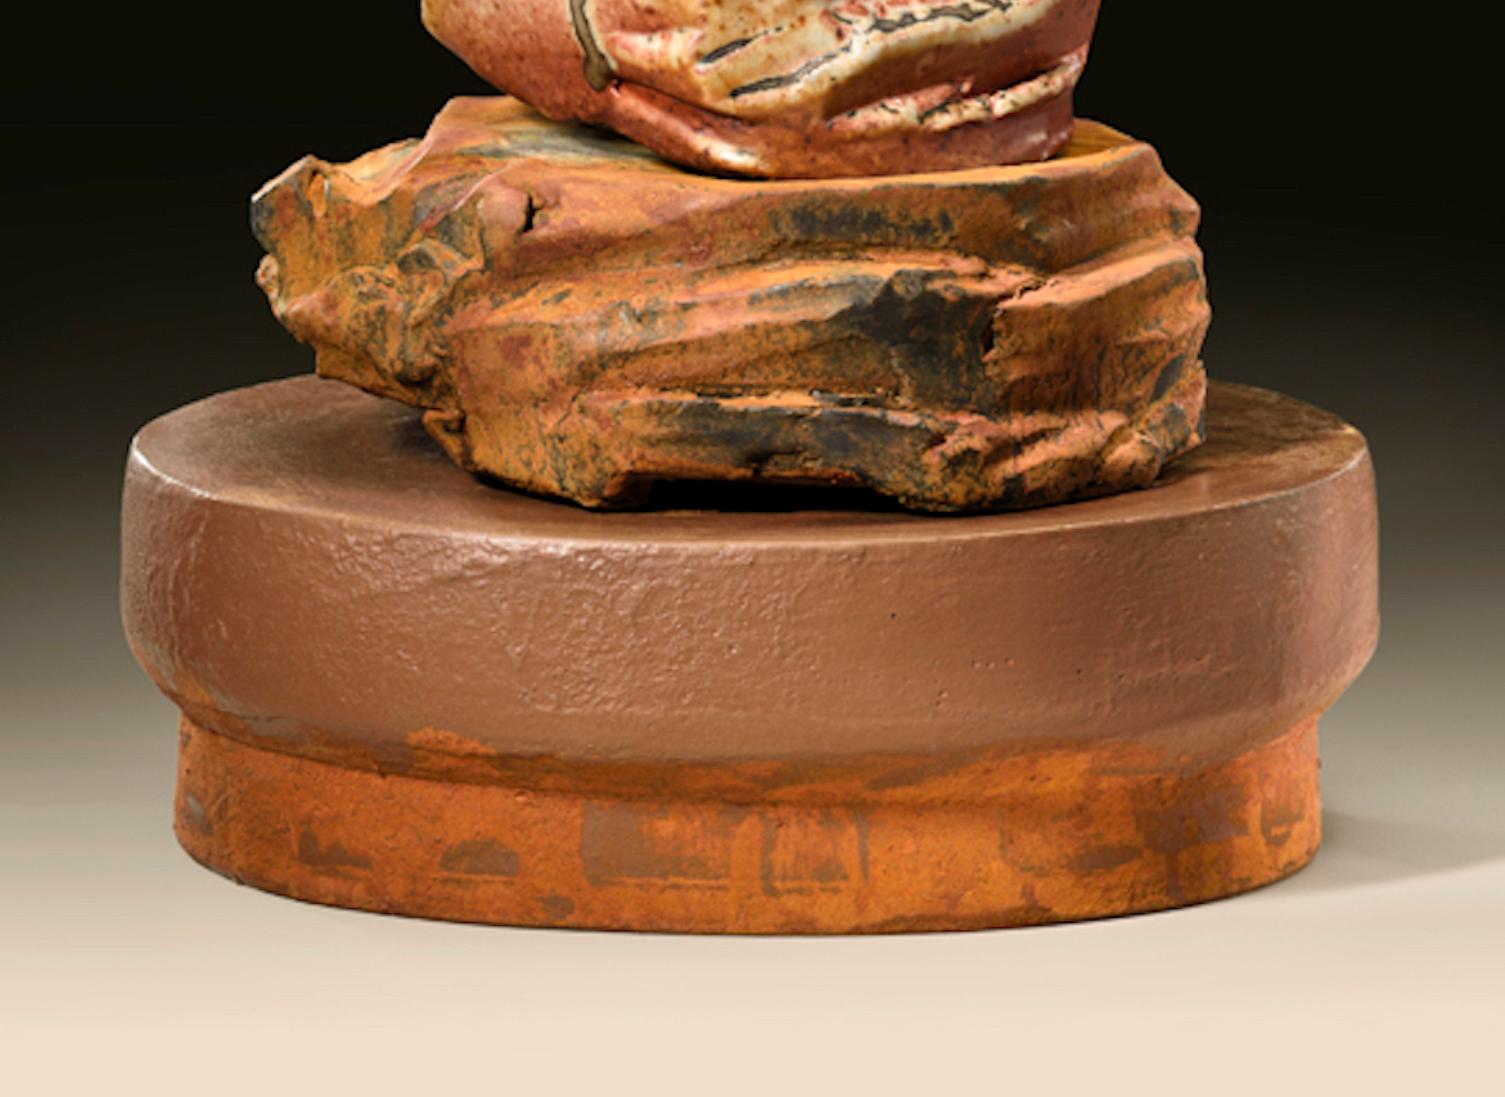 Richard Hirsch Ceramic Scholar Rock Cup Sculpture #19, 2016 In Excellent Condition For Sale In New York, NY